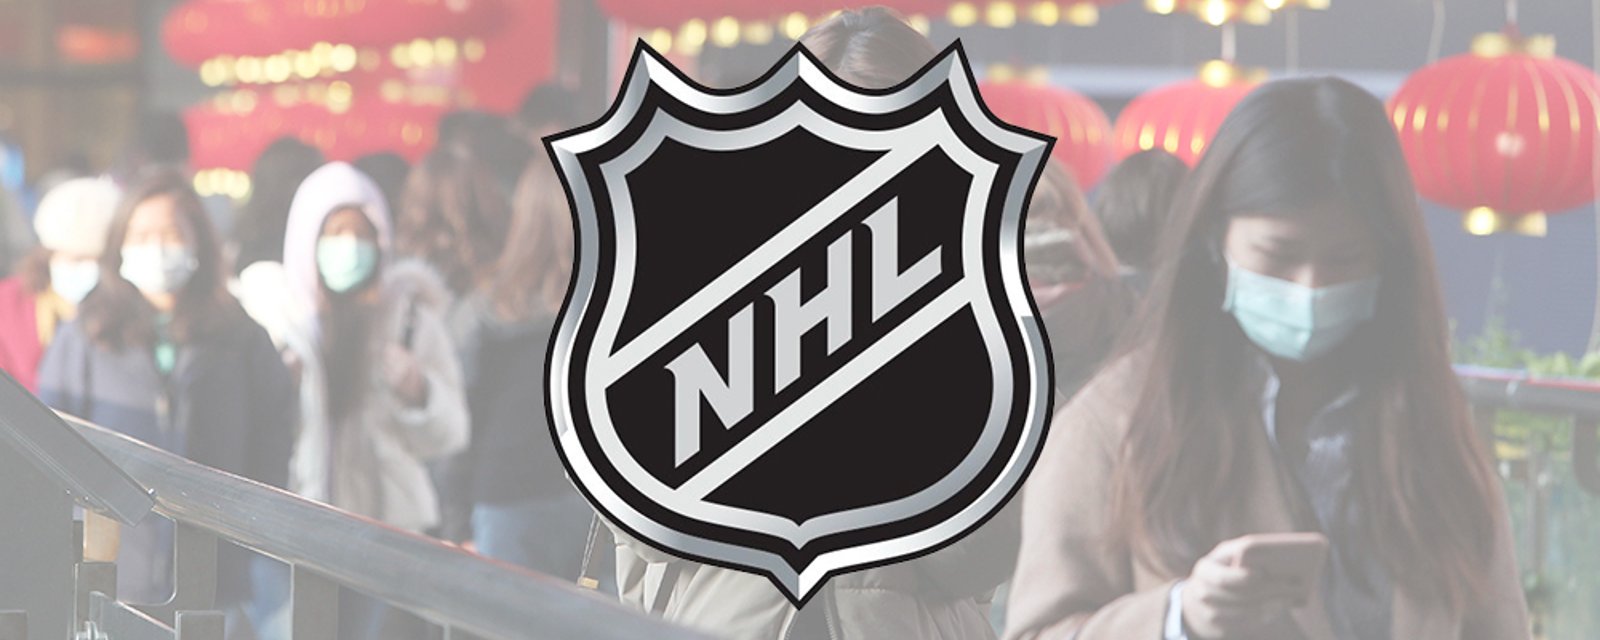 NHL planning to cancel or postpone games due to coronavirus fears